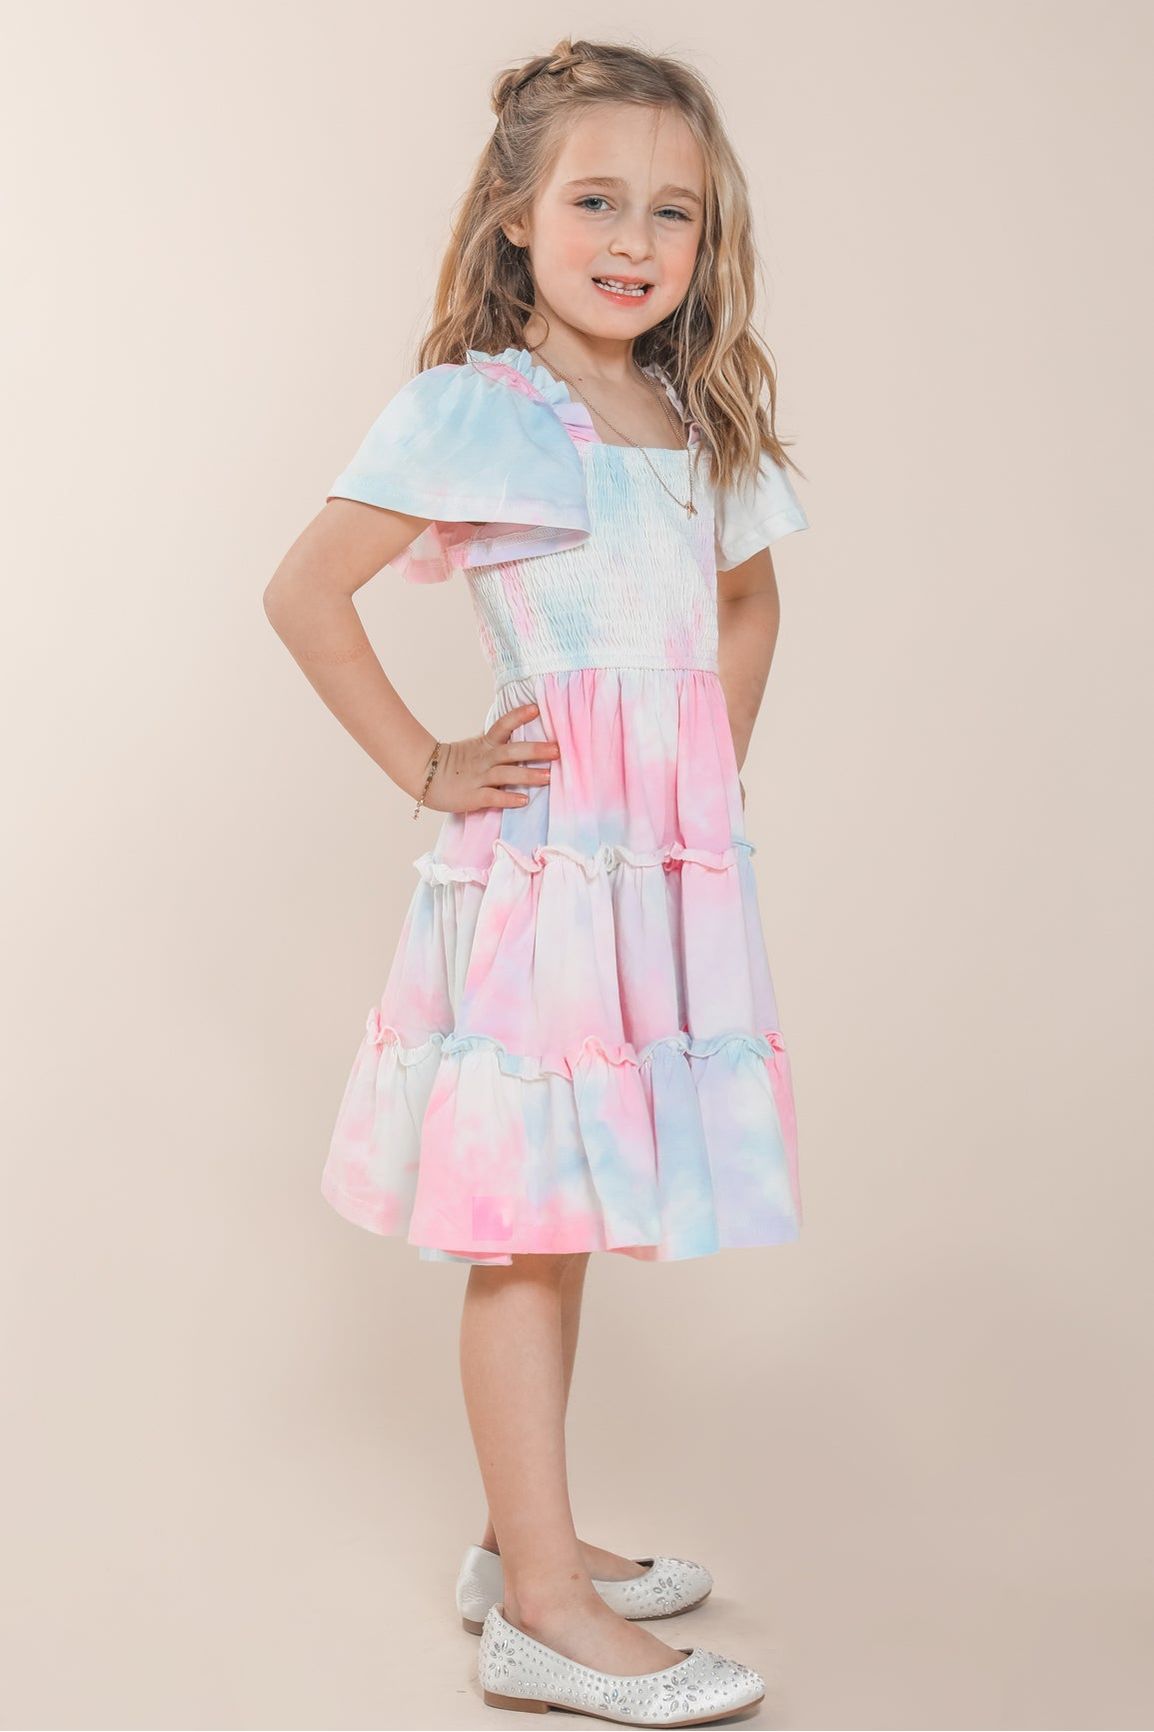 Buy Chiffon Baby Frock l Toddlers Frock Dress